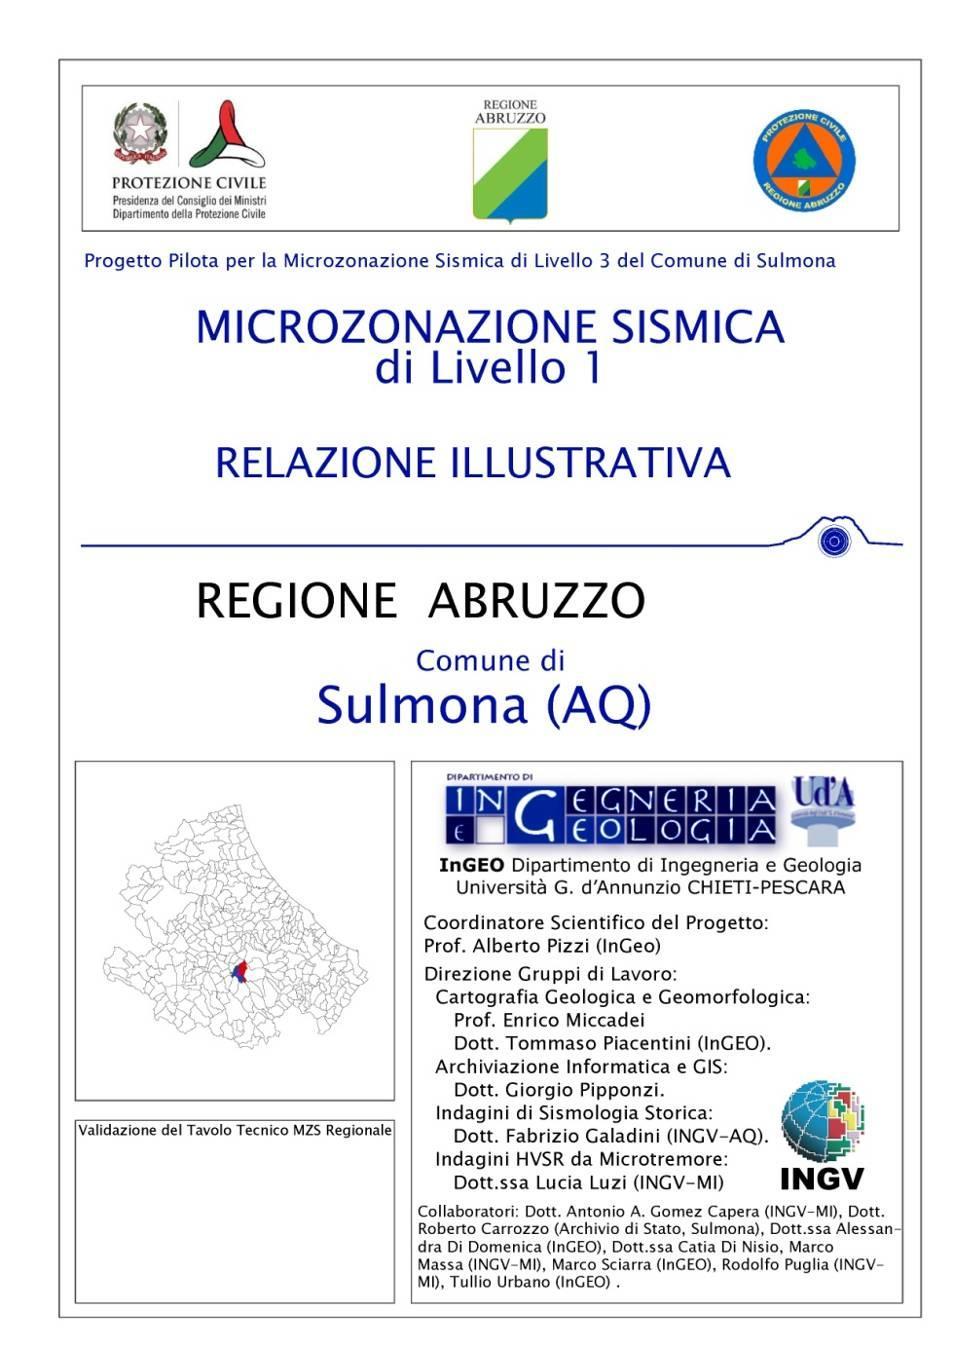 FIRST LEVEL SEISMIC MICROZONING OF SULMONA (CENTRAL ITALY): MAJOR RESULTS AND EVIDENCES OF 2D/3D AMPLIFICATION A. PIZZI, L. LUZI, F. GALADINI, E. MICCADEI, T.